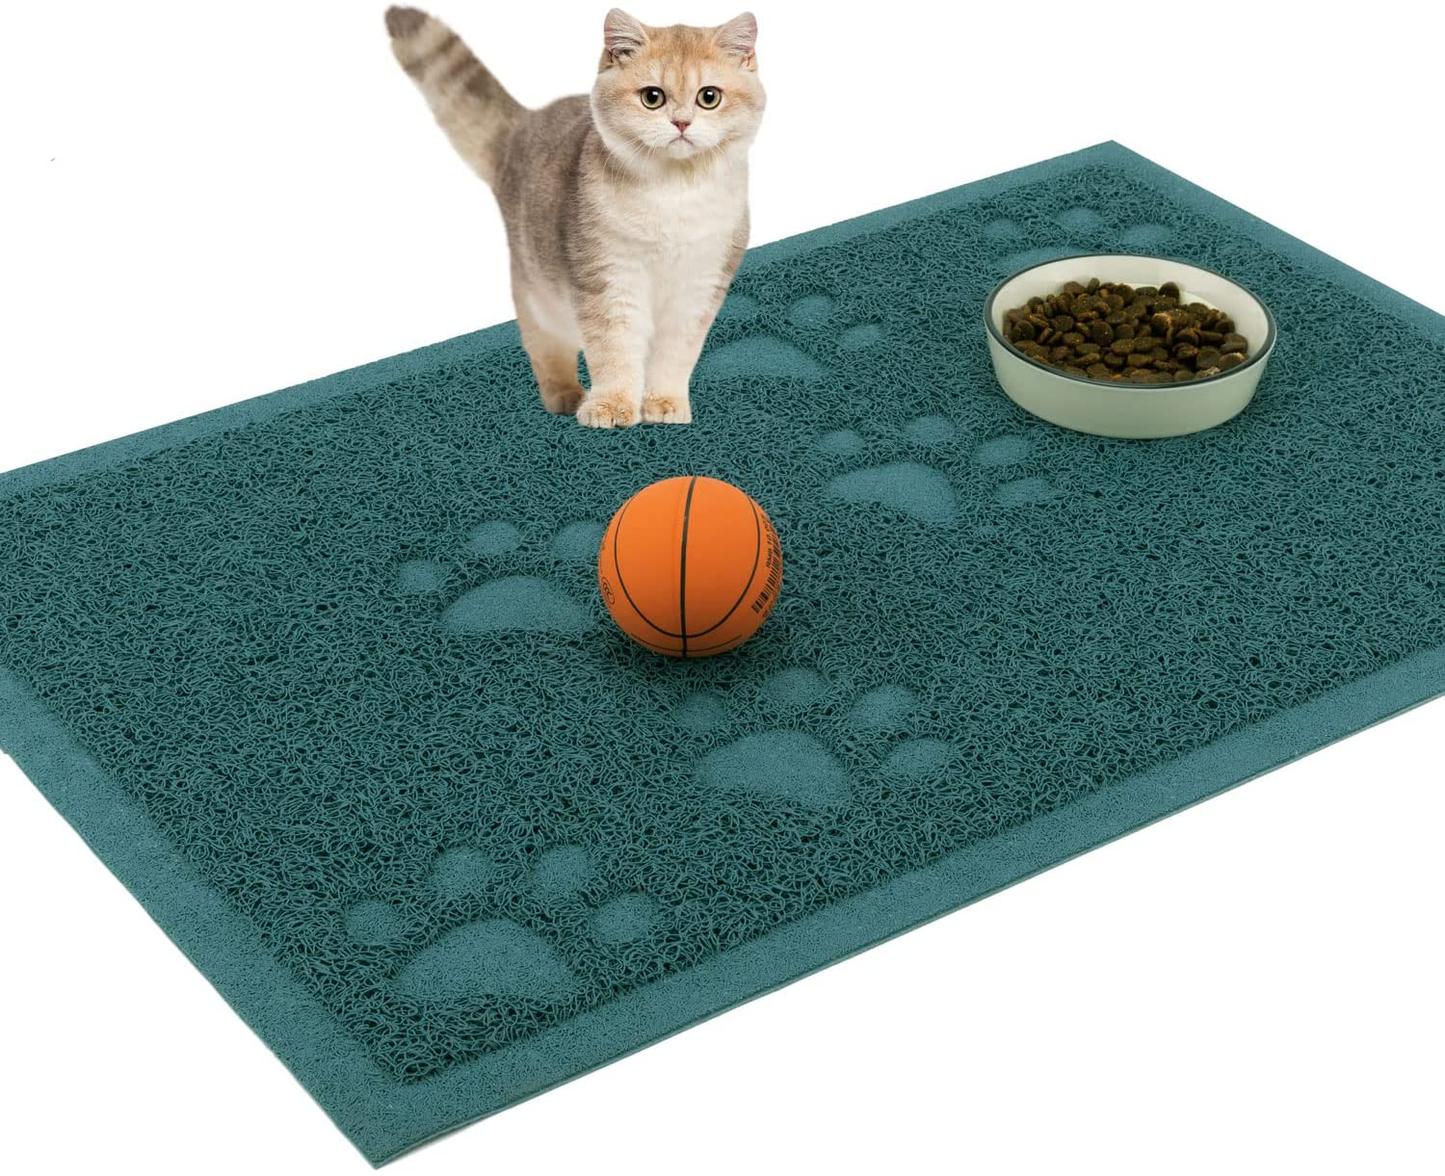 URDOGSL Cat Litter Mat, Premium Durable Cat Litter Trapping Mat for Litter Boxes, Water Resistant and Scatter Control Cat Feeding Mat, Non-Slip Backing, Easy to Clean